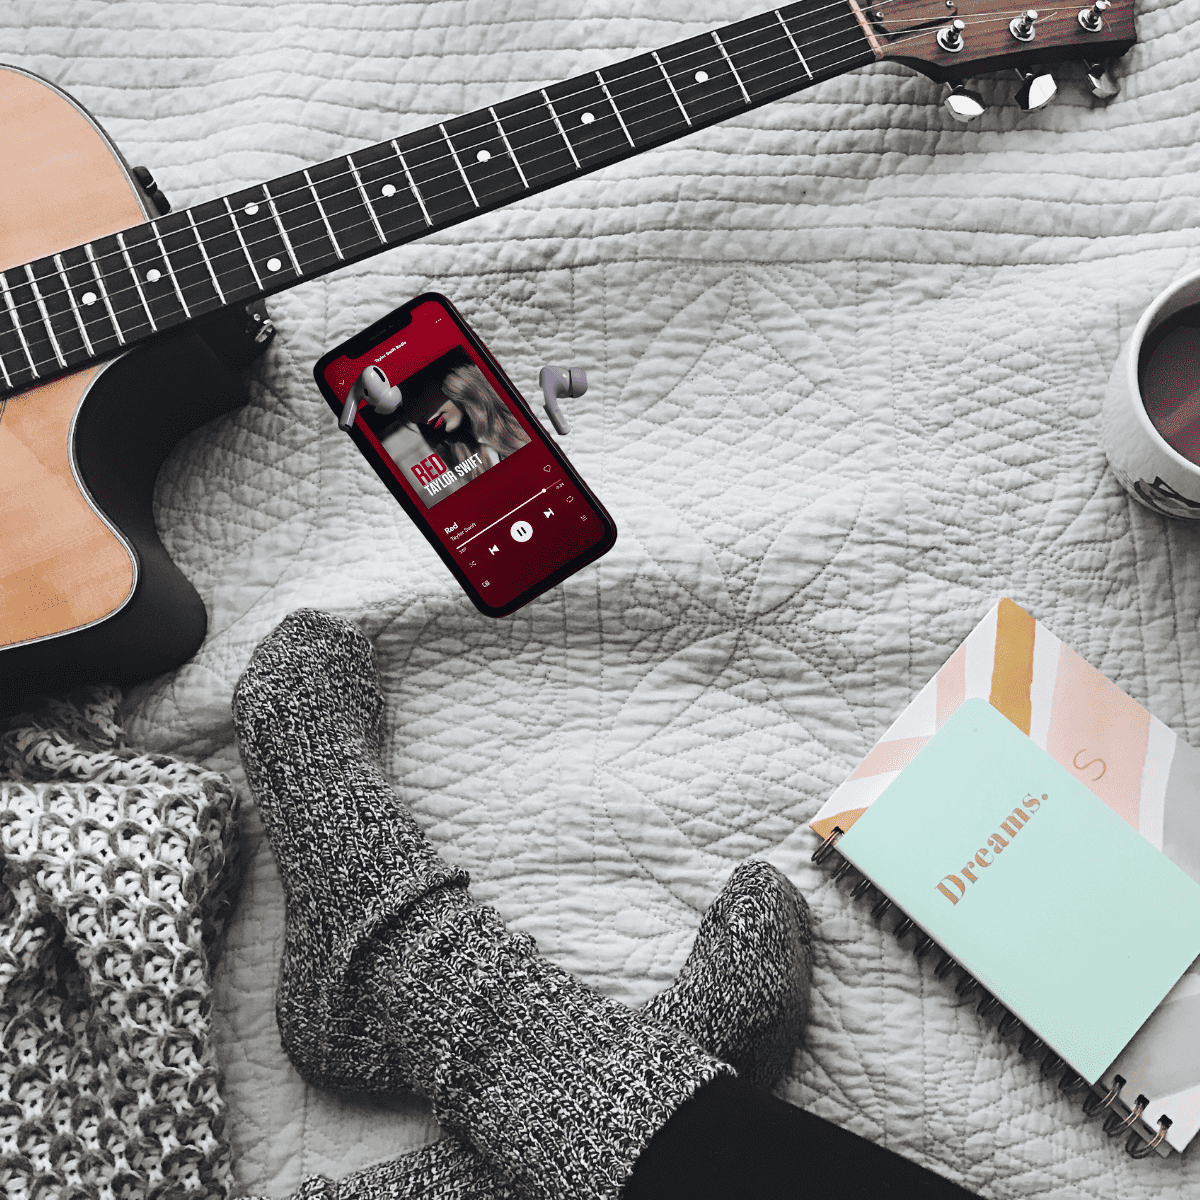 guitar, socks, books, coffee, and taylor swift music on iphone